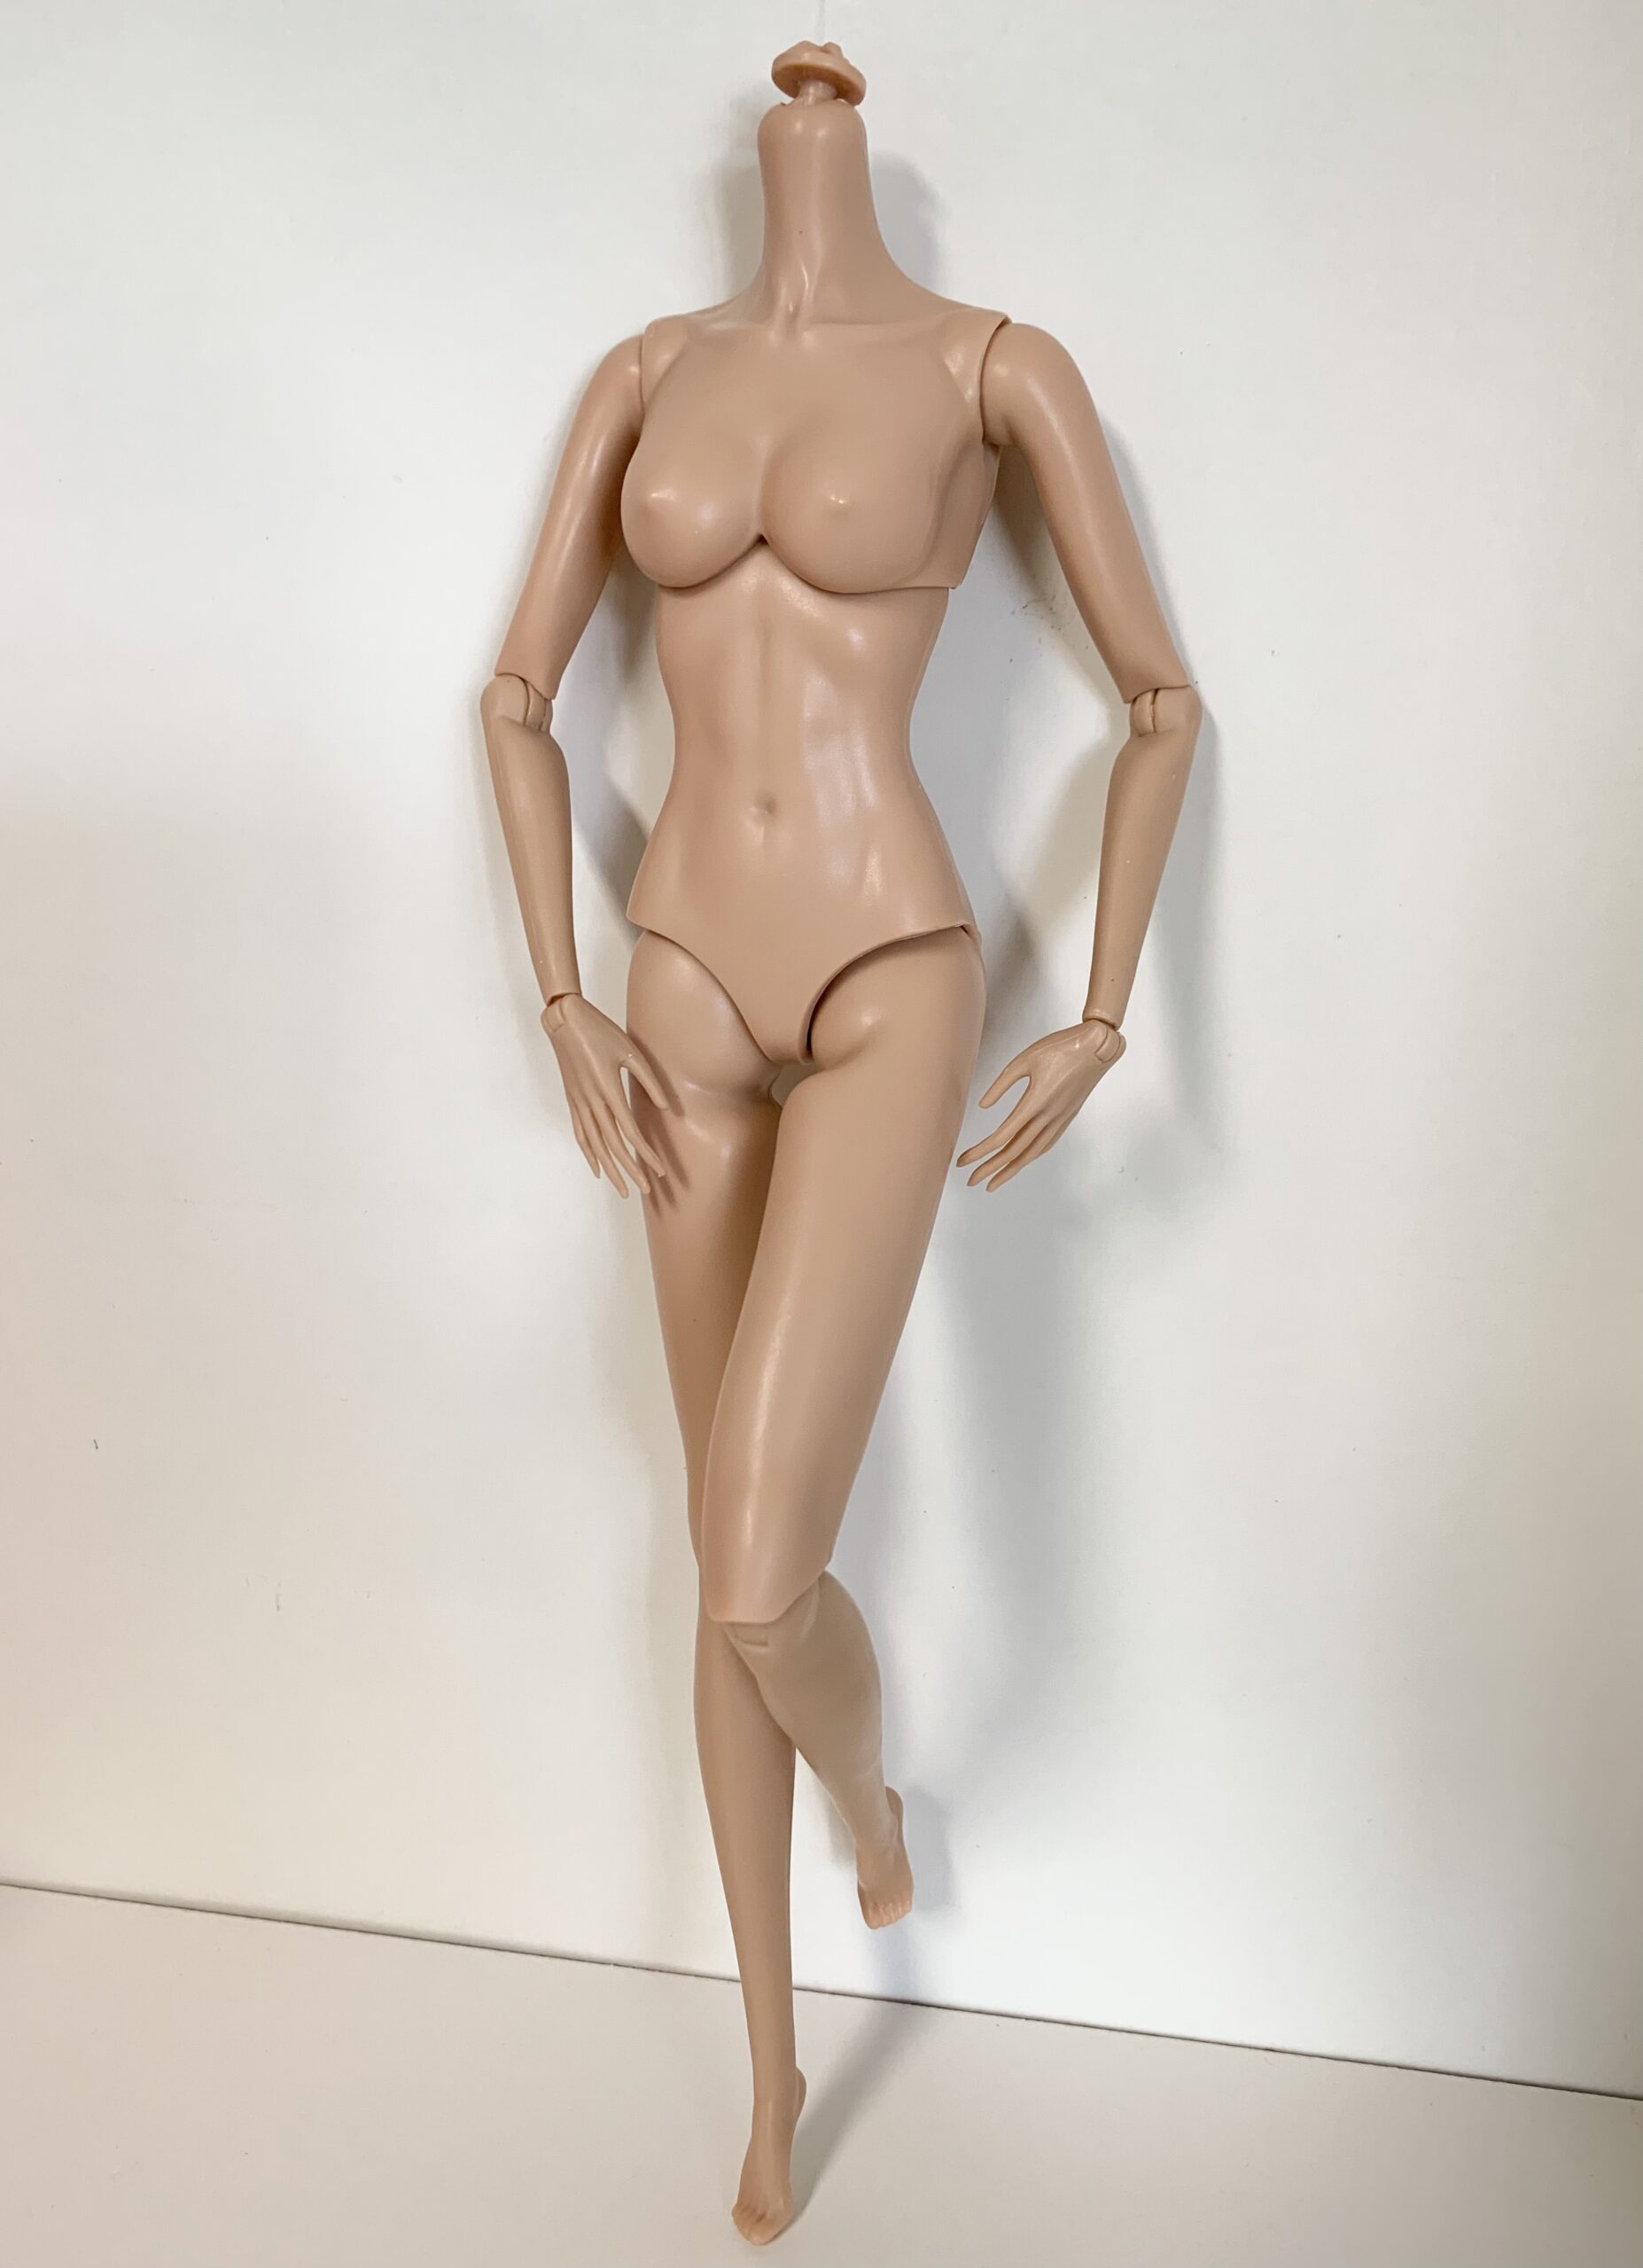 DIY OOAK Replacement 12" SUPERMODEL Doll Body Lot 4 Pack Articulated By Eledoll 